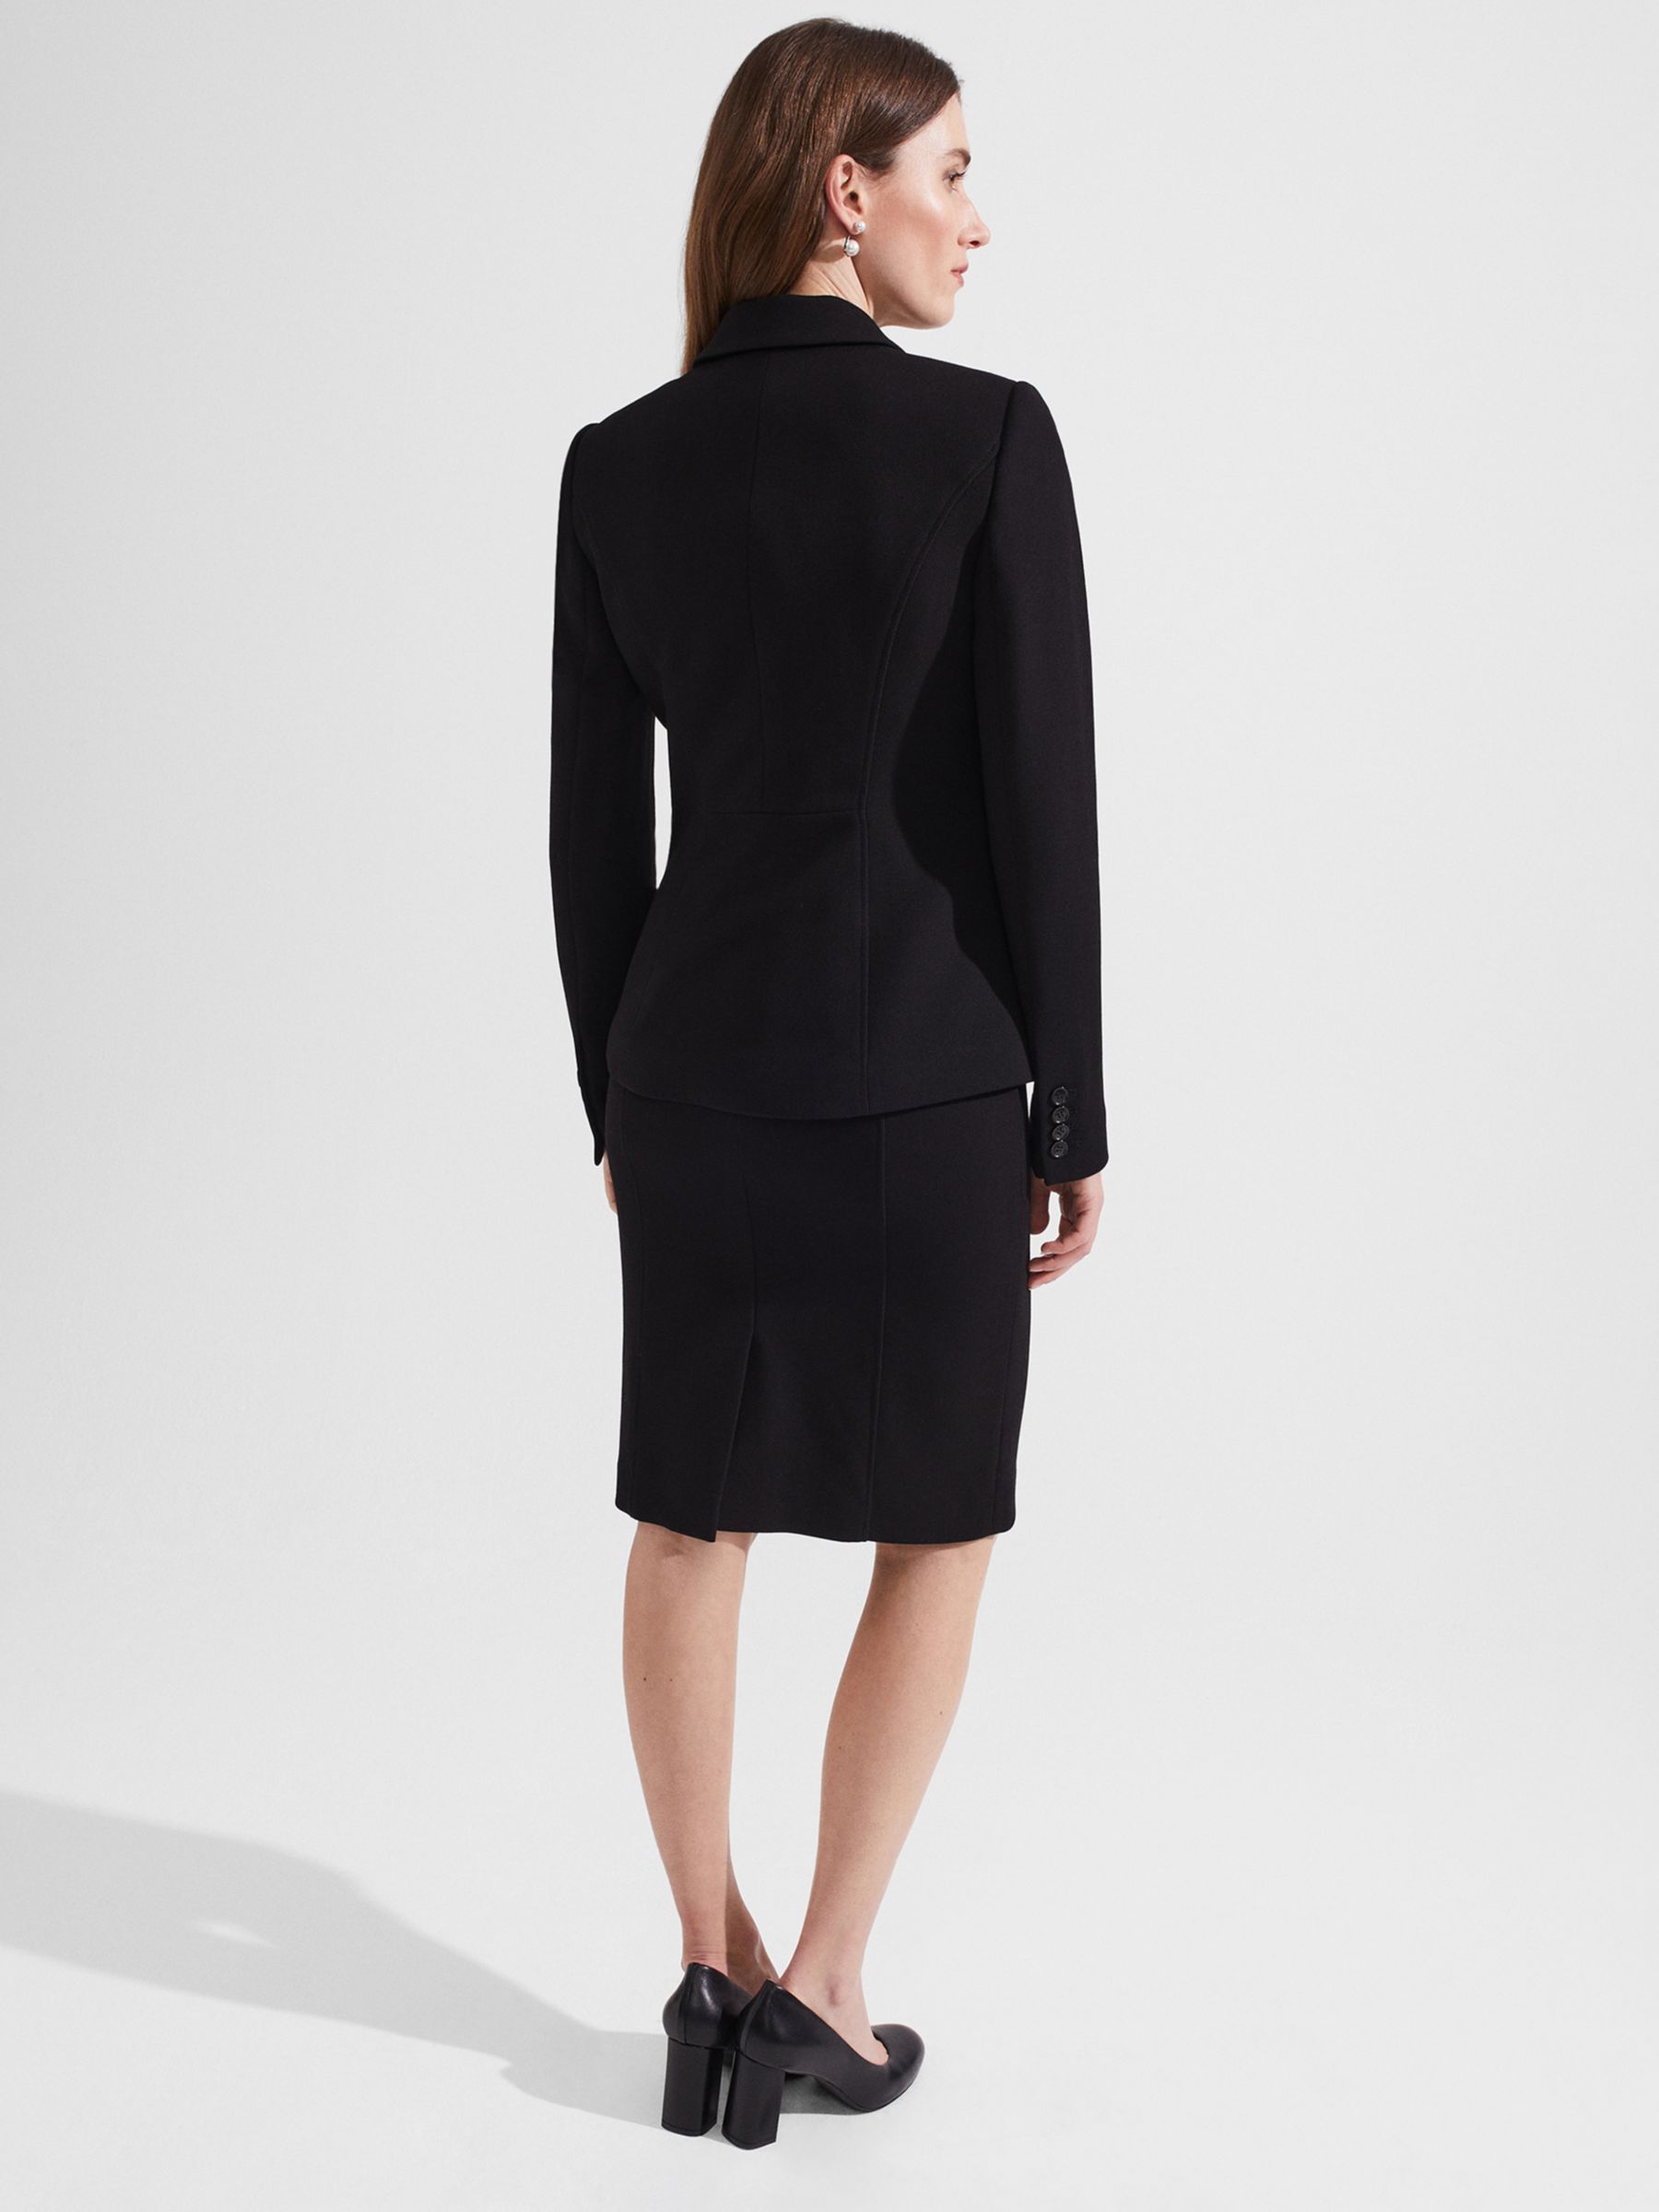 Skirt Suits, Women's Two Piece Tailored Skirts & Jackets, Hobbs US